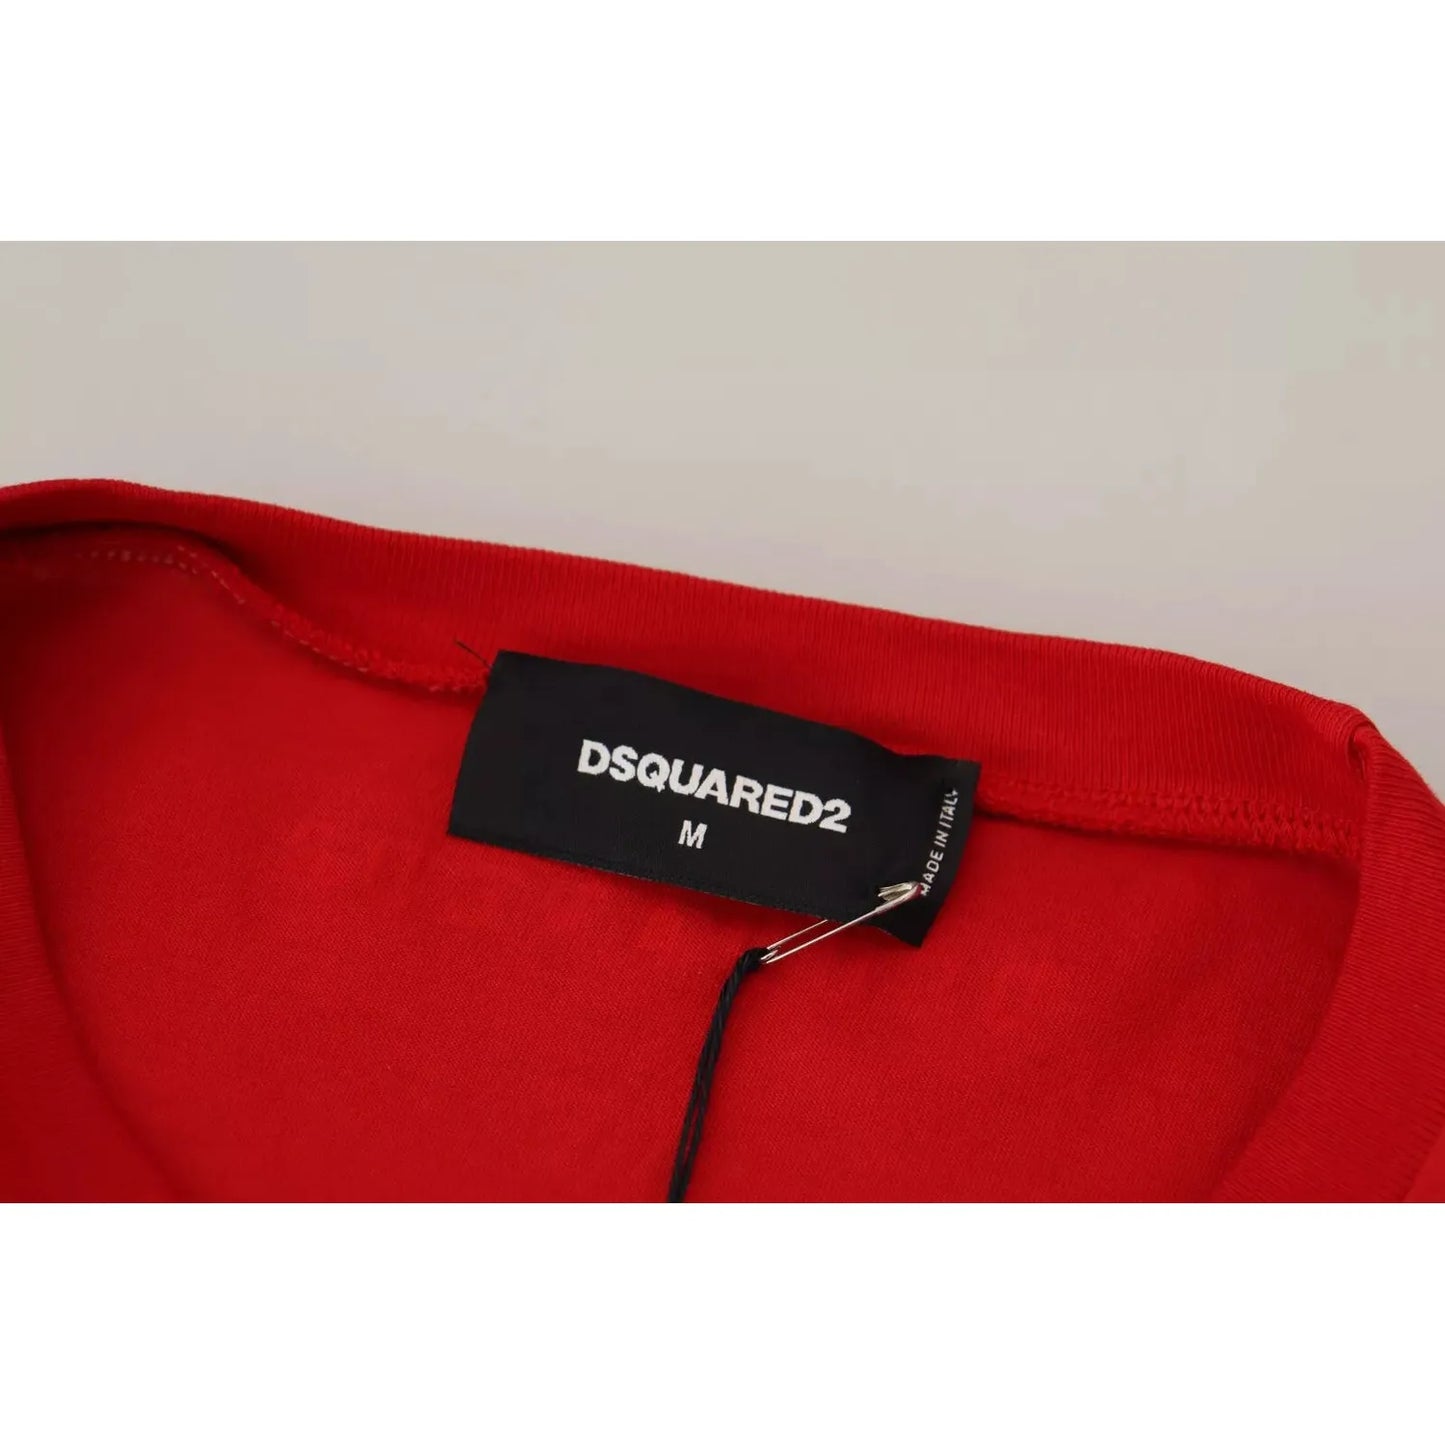 Dsquared² Red Printed Cotton Short Sleeves Crewneck T-shirt red-printed-cotton-short-sleeves-crewneck-t-shirt